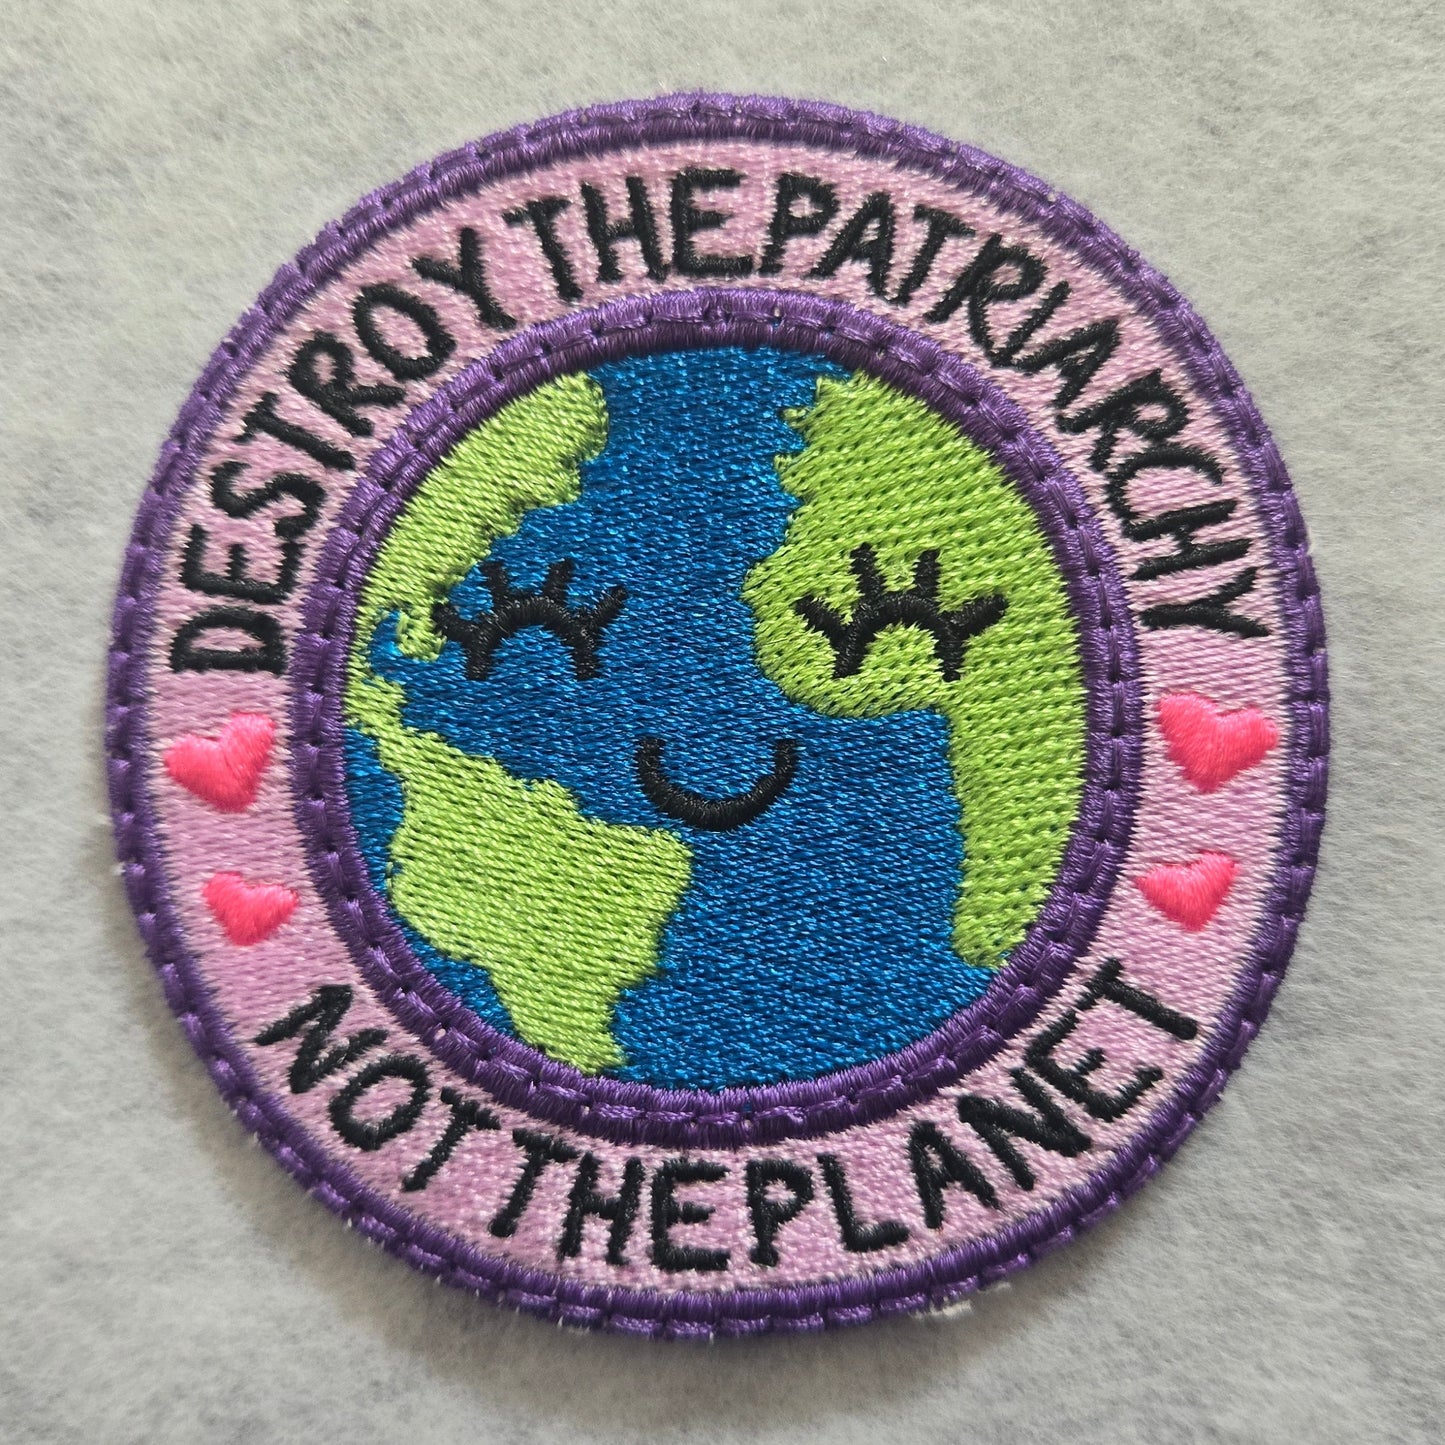 "Destroy the Patriarchy Not the Planet" Embroidered Patch